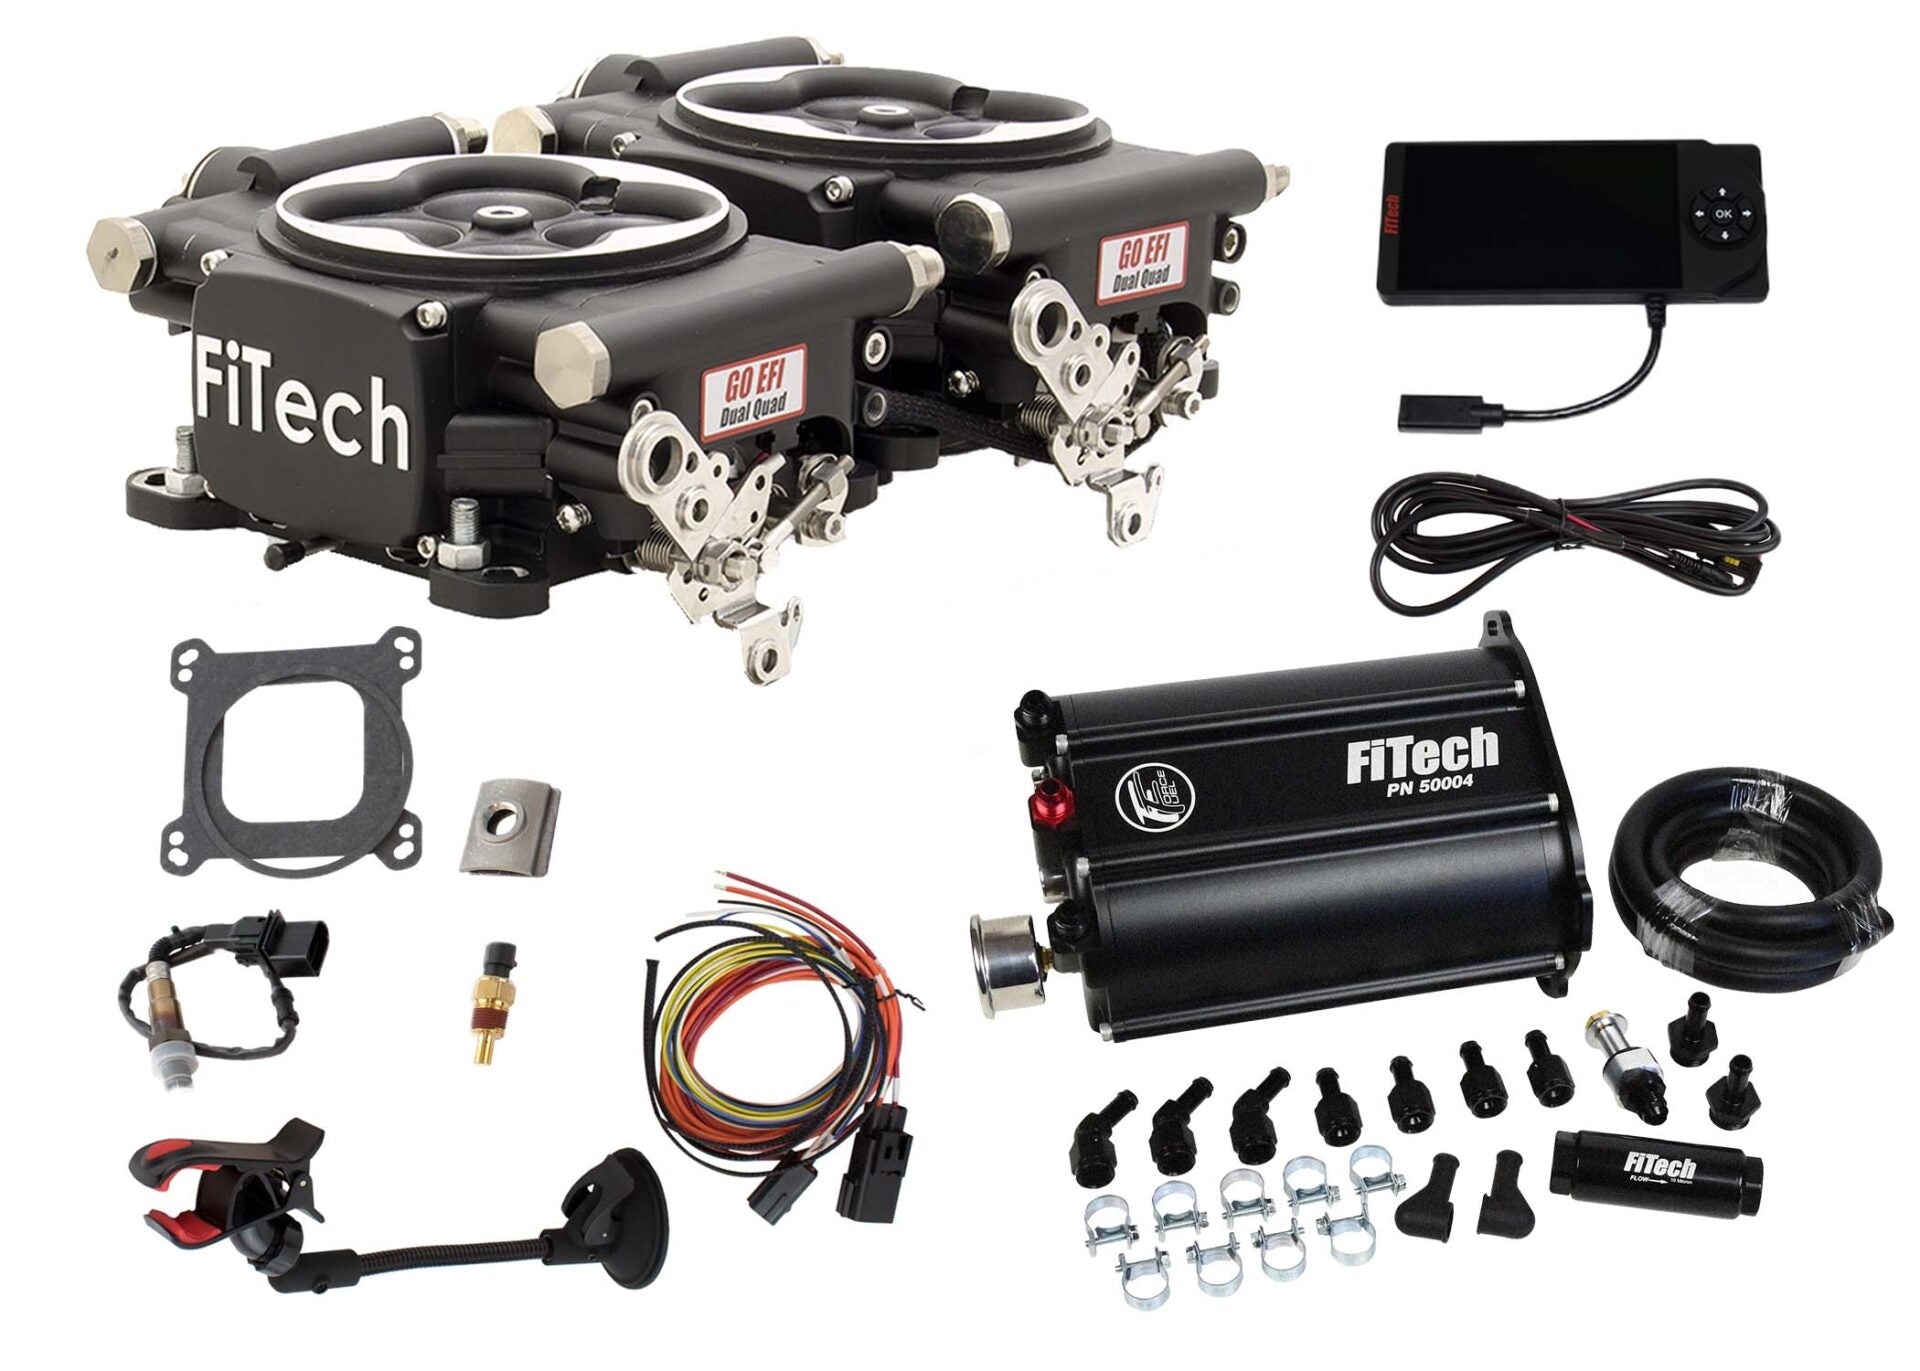 FiTech 35262 Go EFI 2x4 System (Black Finish) Master Kit w/ Force Fuel, Fuel Delivery System